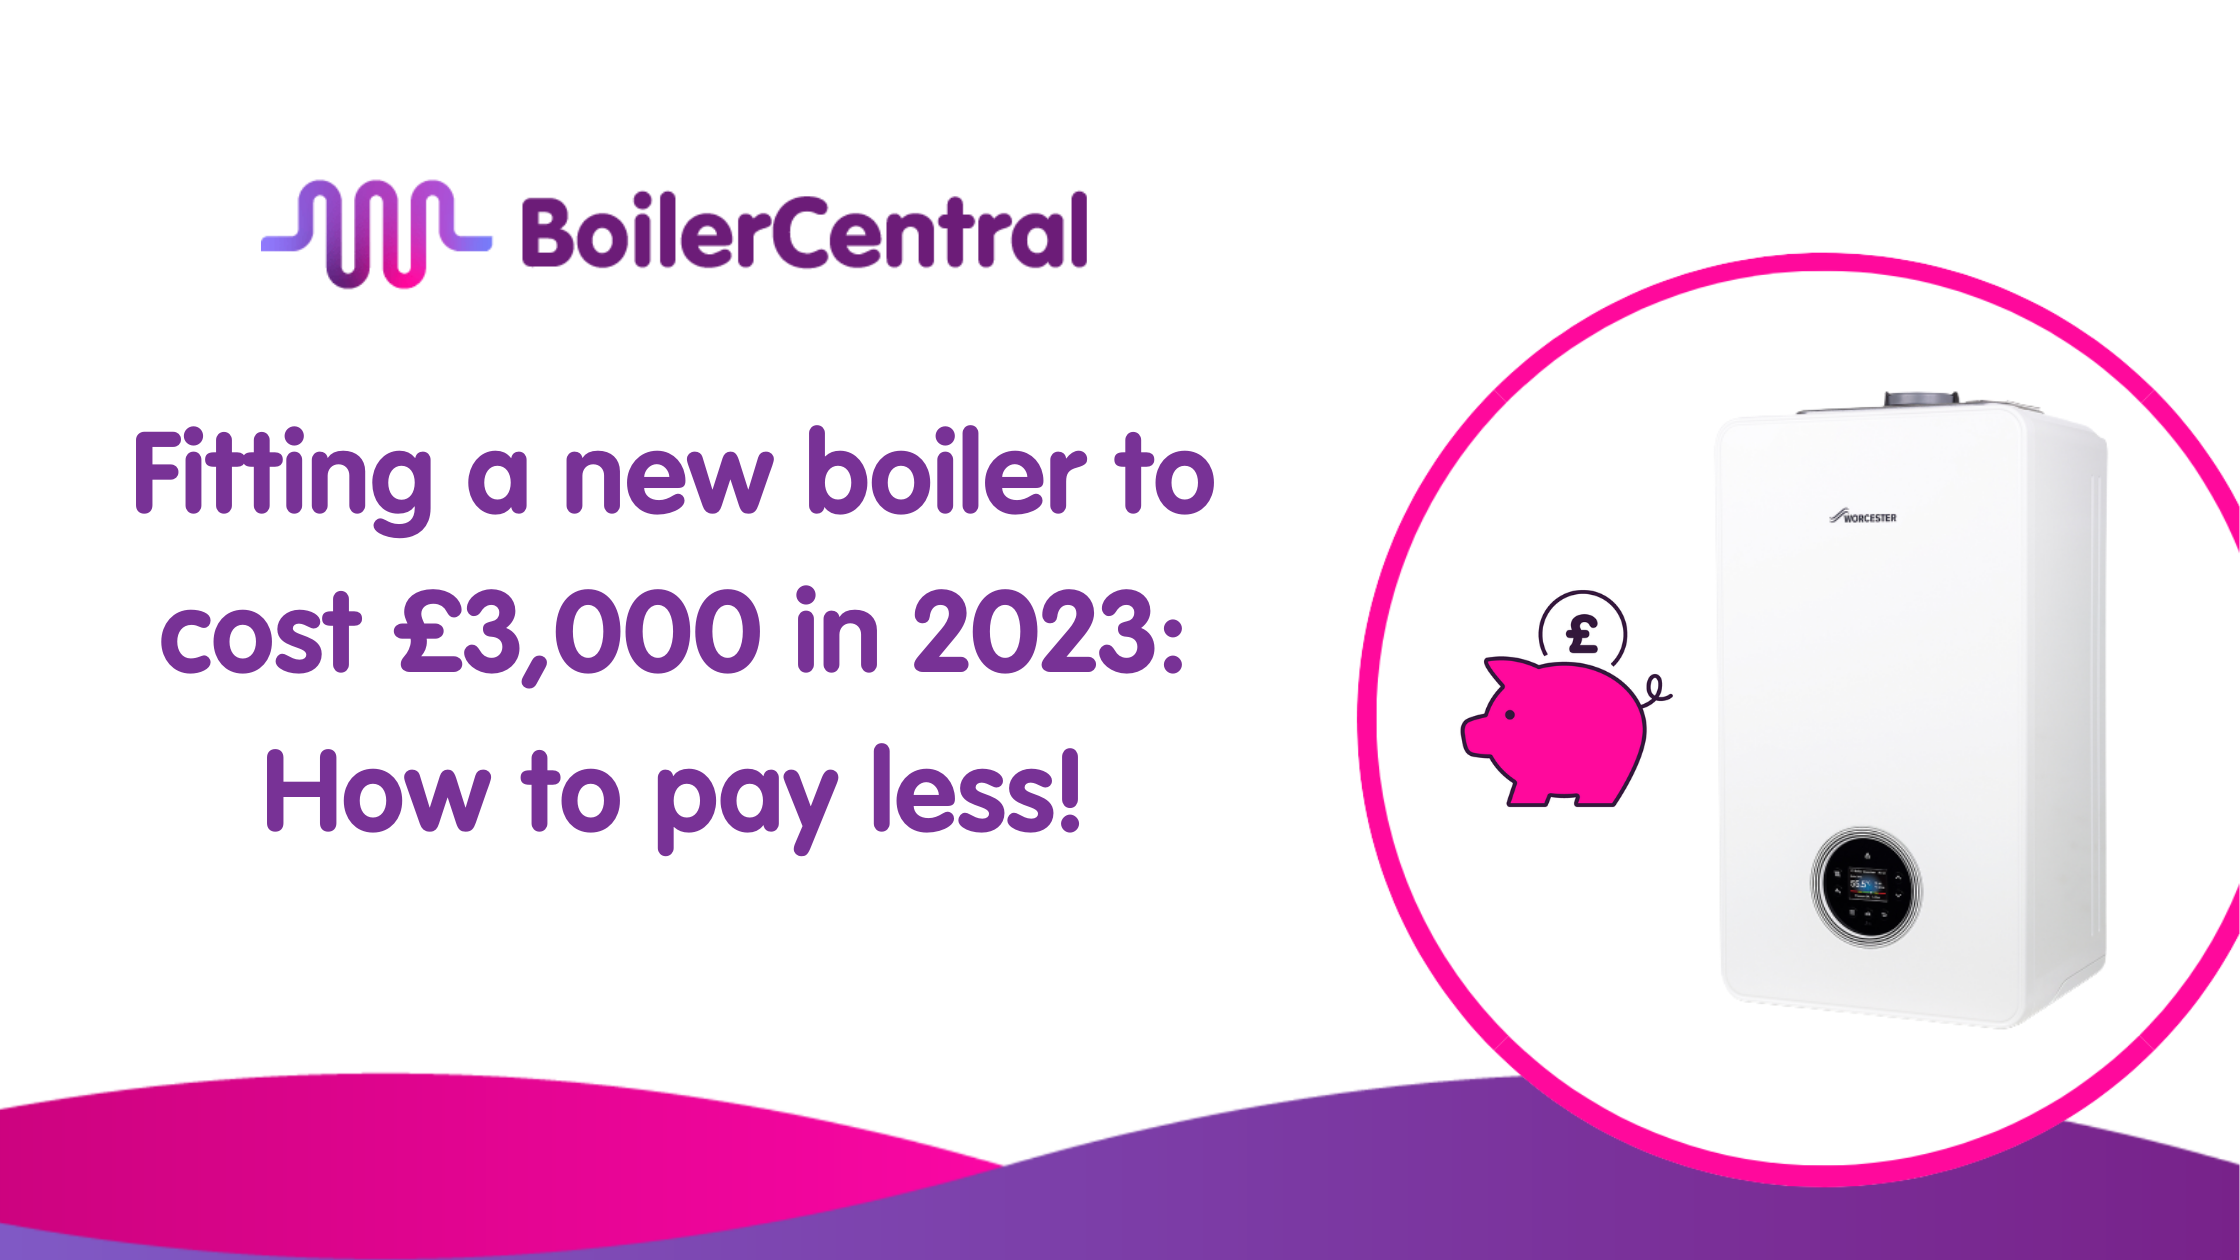 Fitting a new boiler to cost £3,000 in 2023: How to pay less!